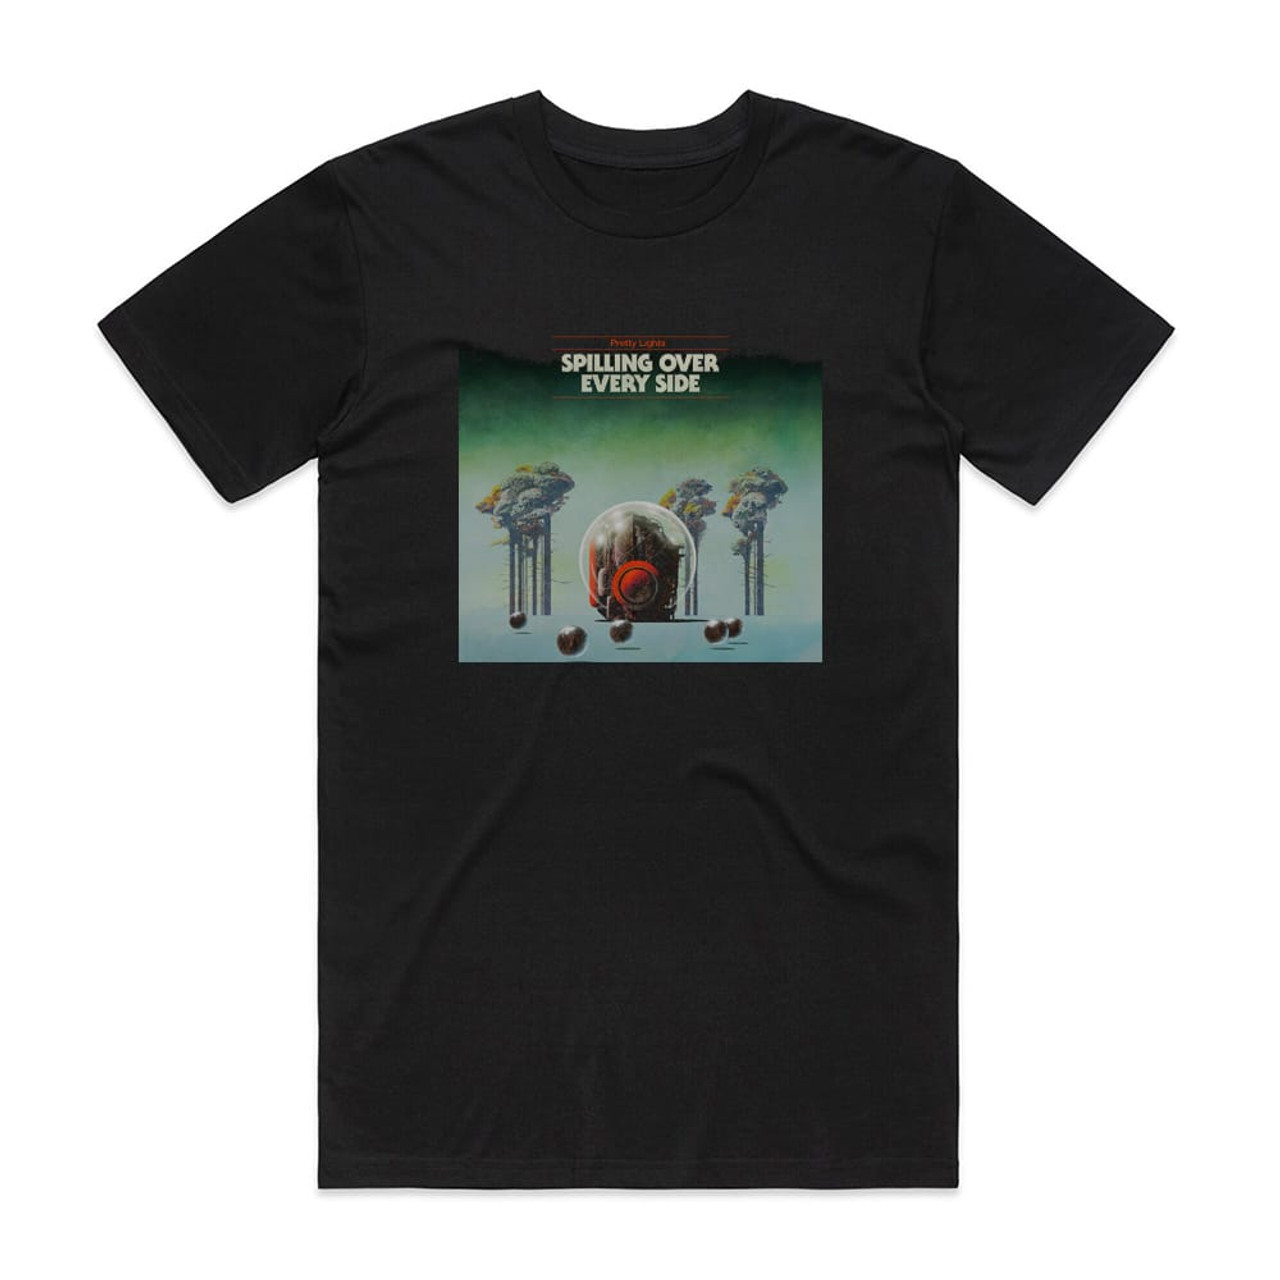 Pretty Lights Spilling Over Every Side Album Cover T-Shirt Black